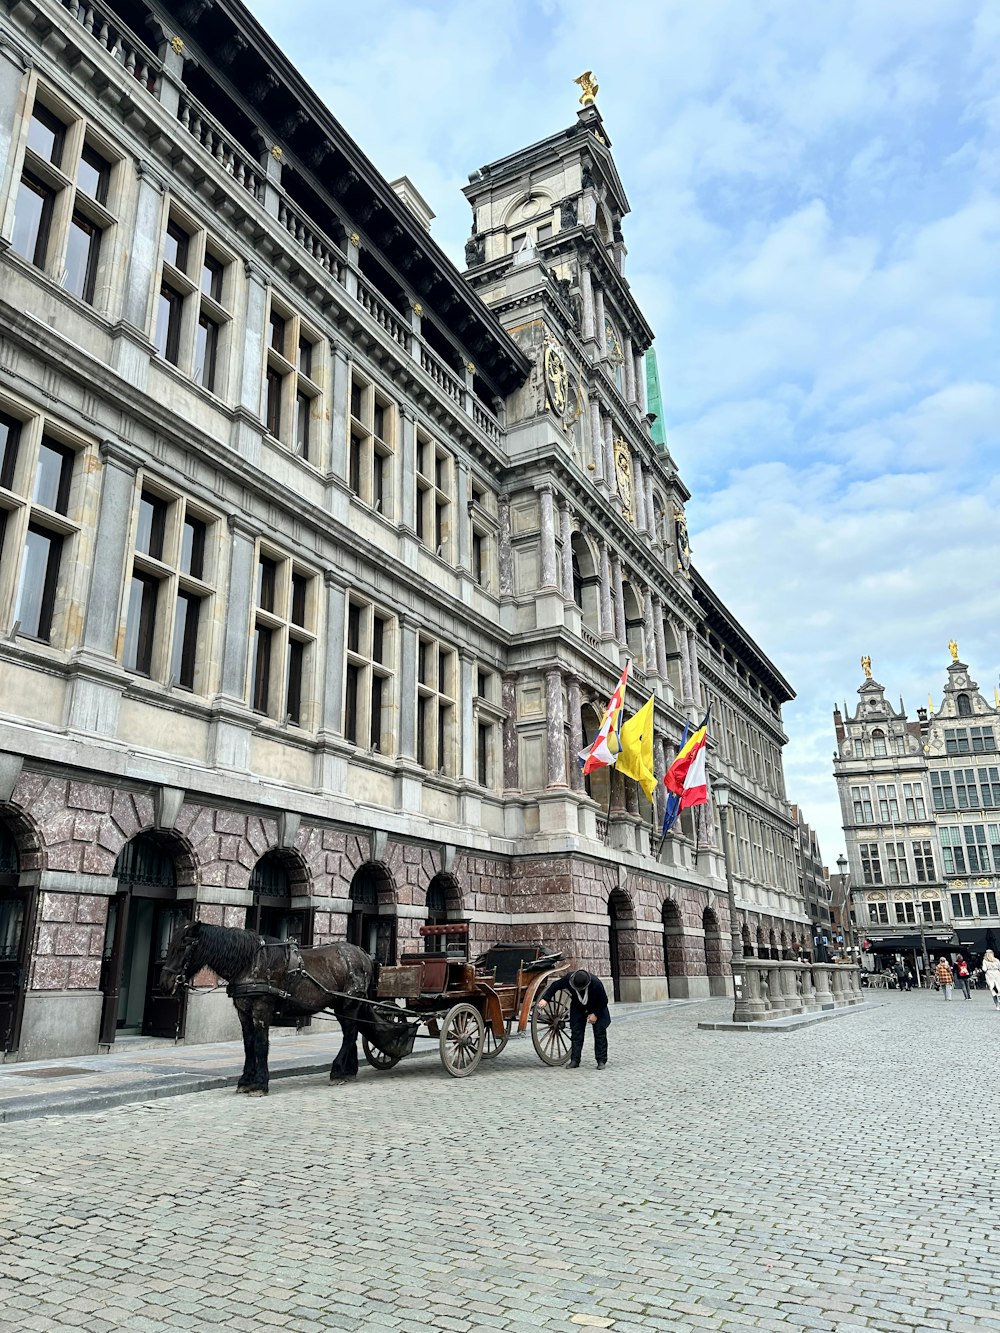 a horse drawn carriage sitting in front of a building